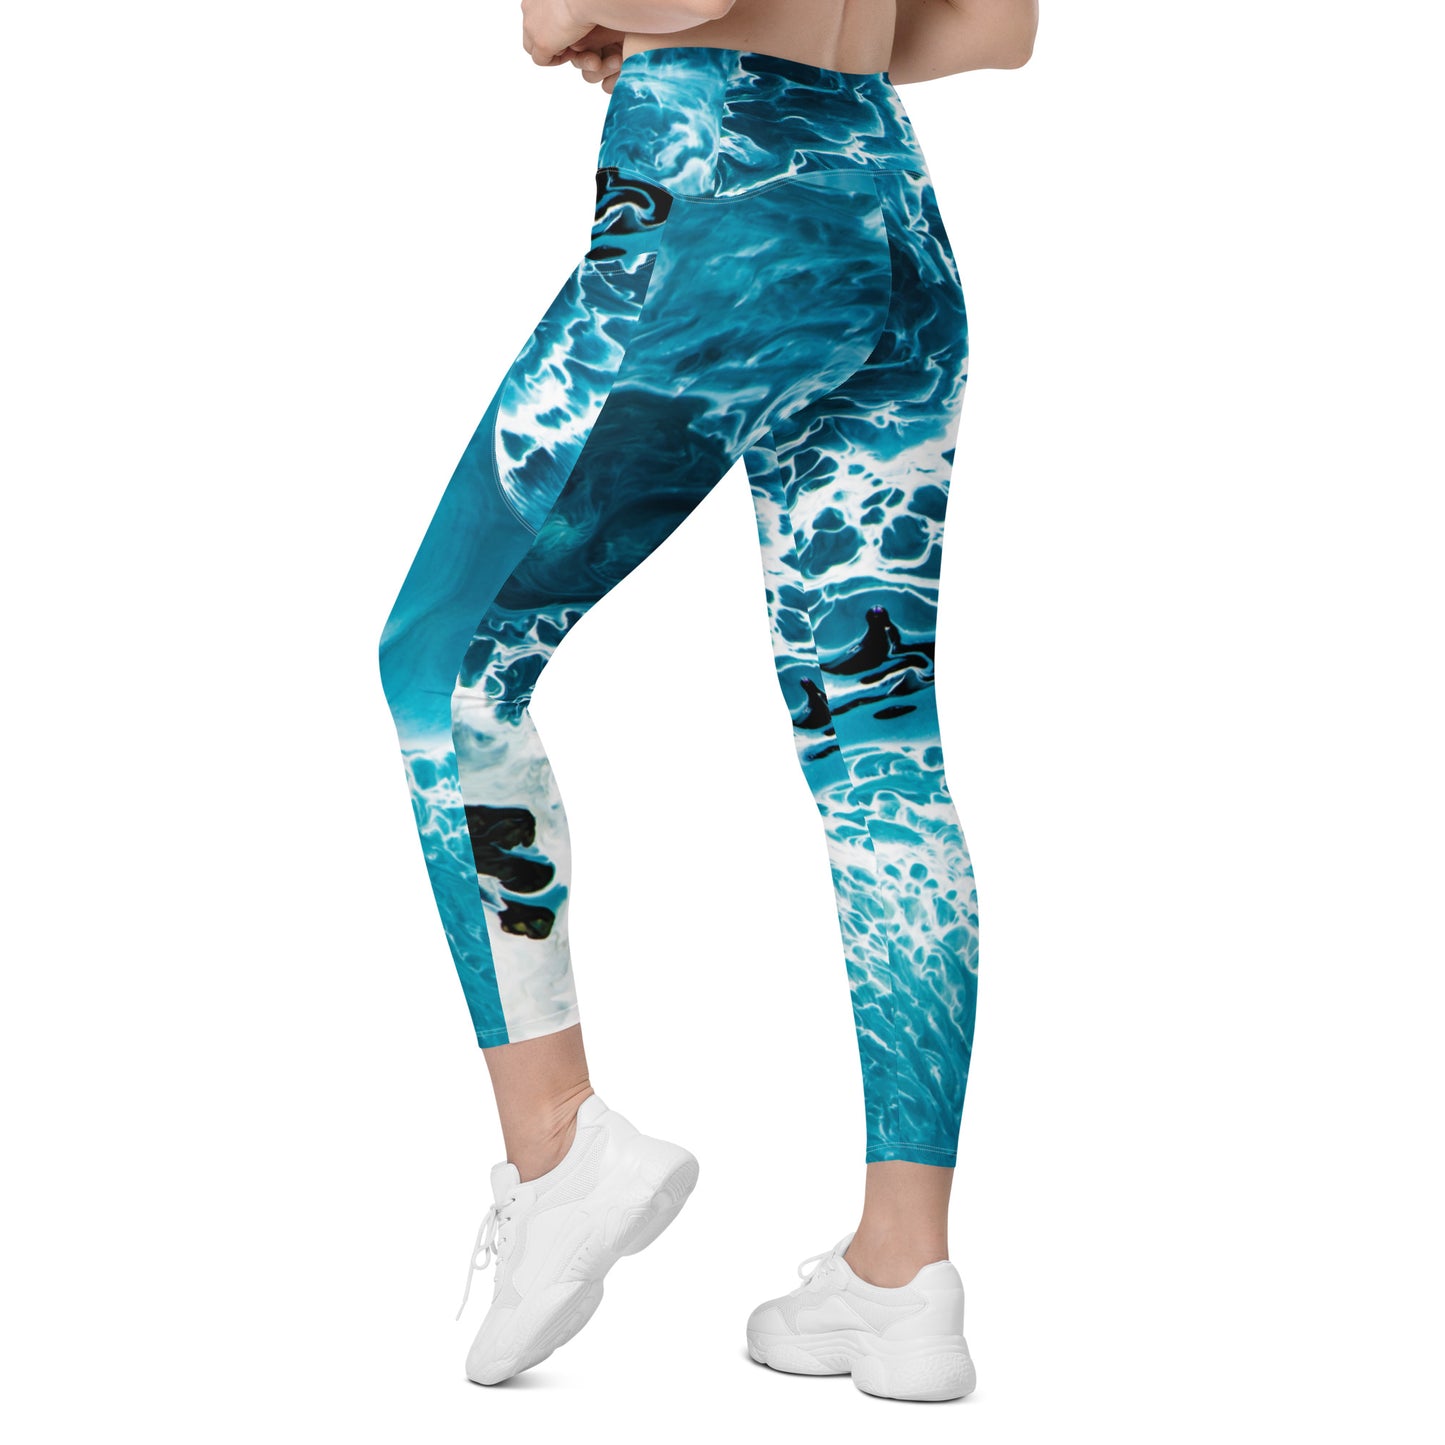 Crossover leggings with side-pockets-Cascade